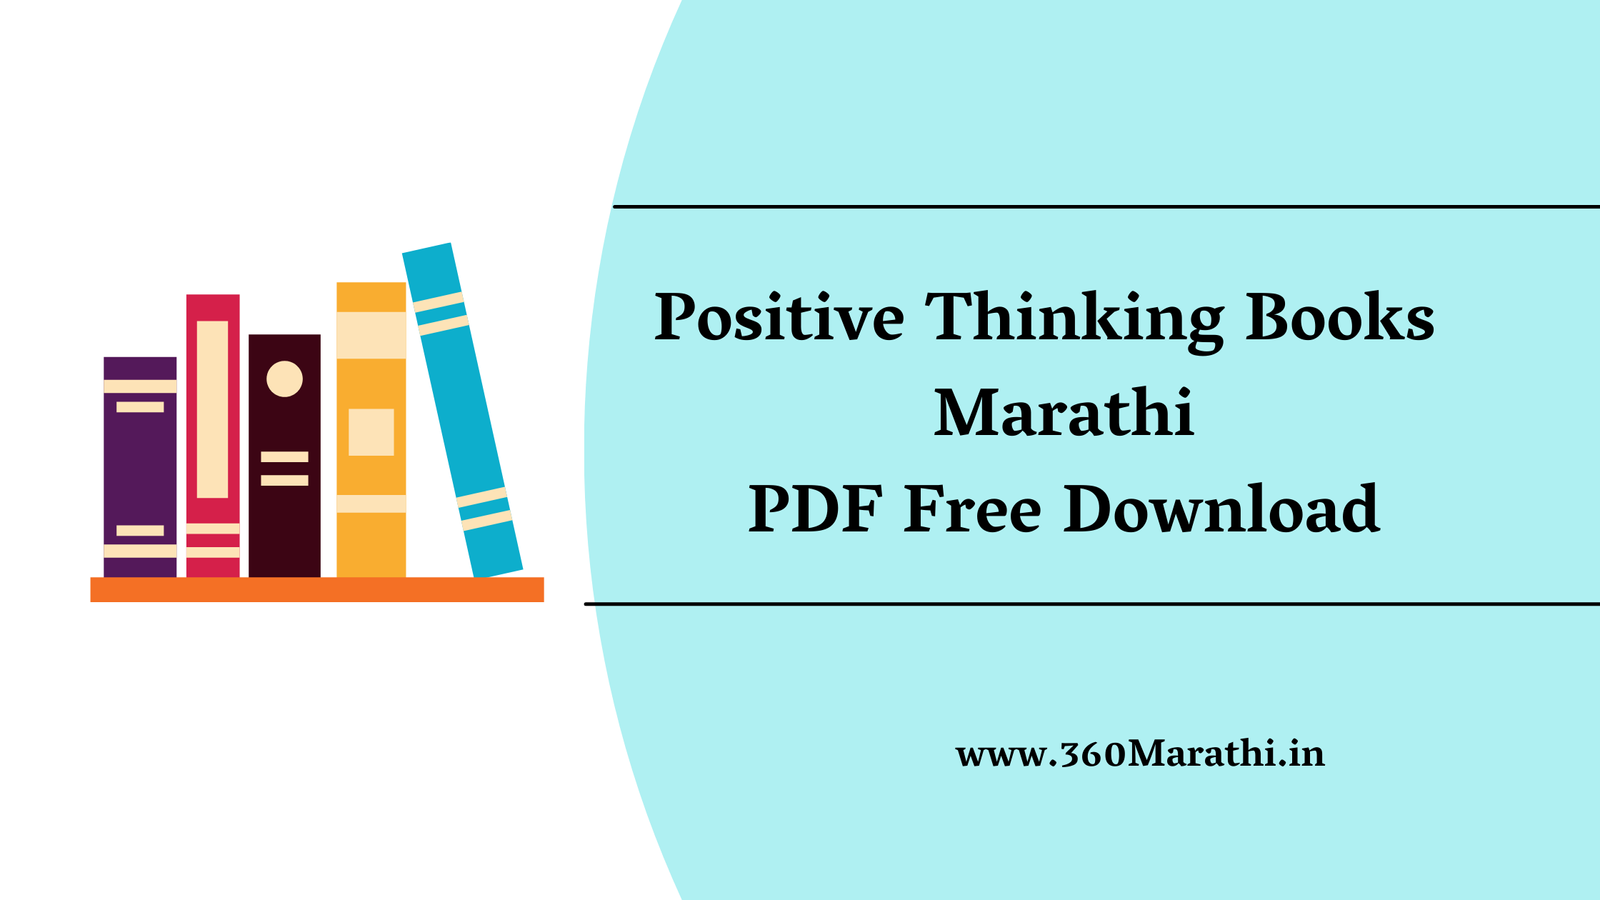 Positive Thinking Books in Marathi PDF Free Download